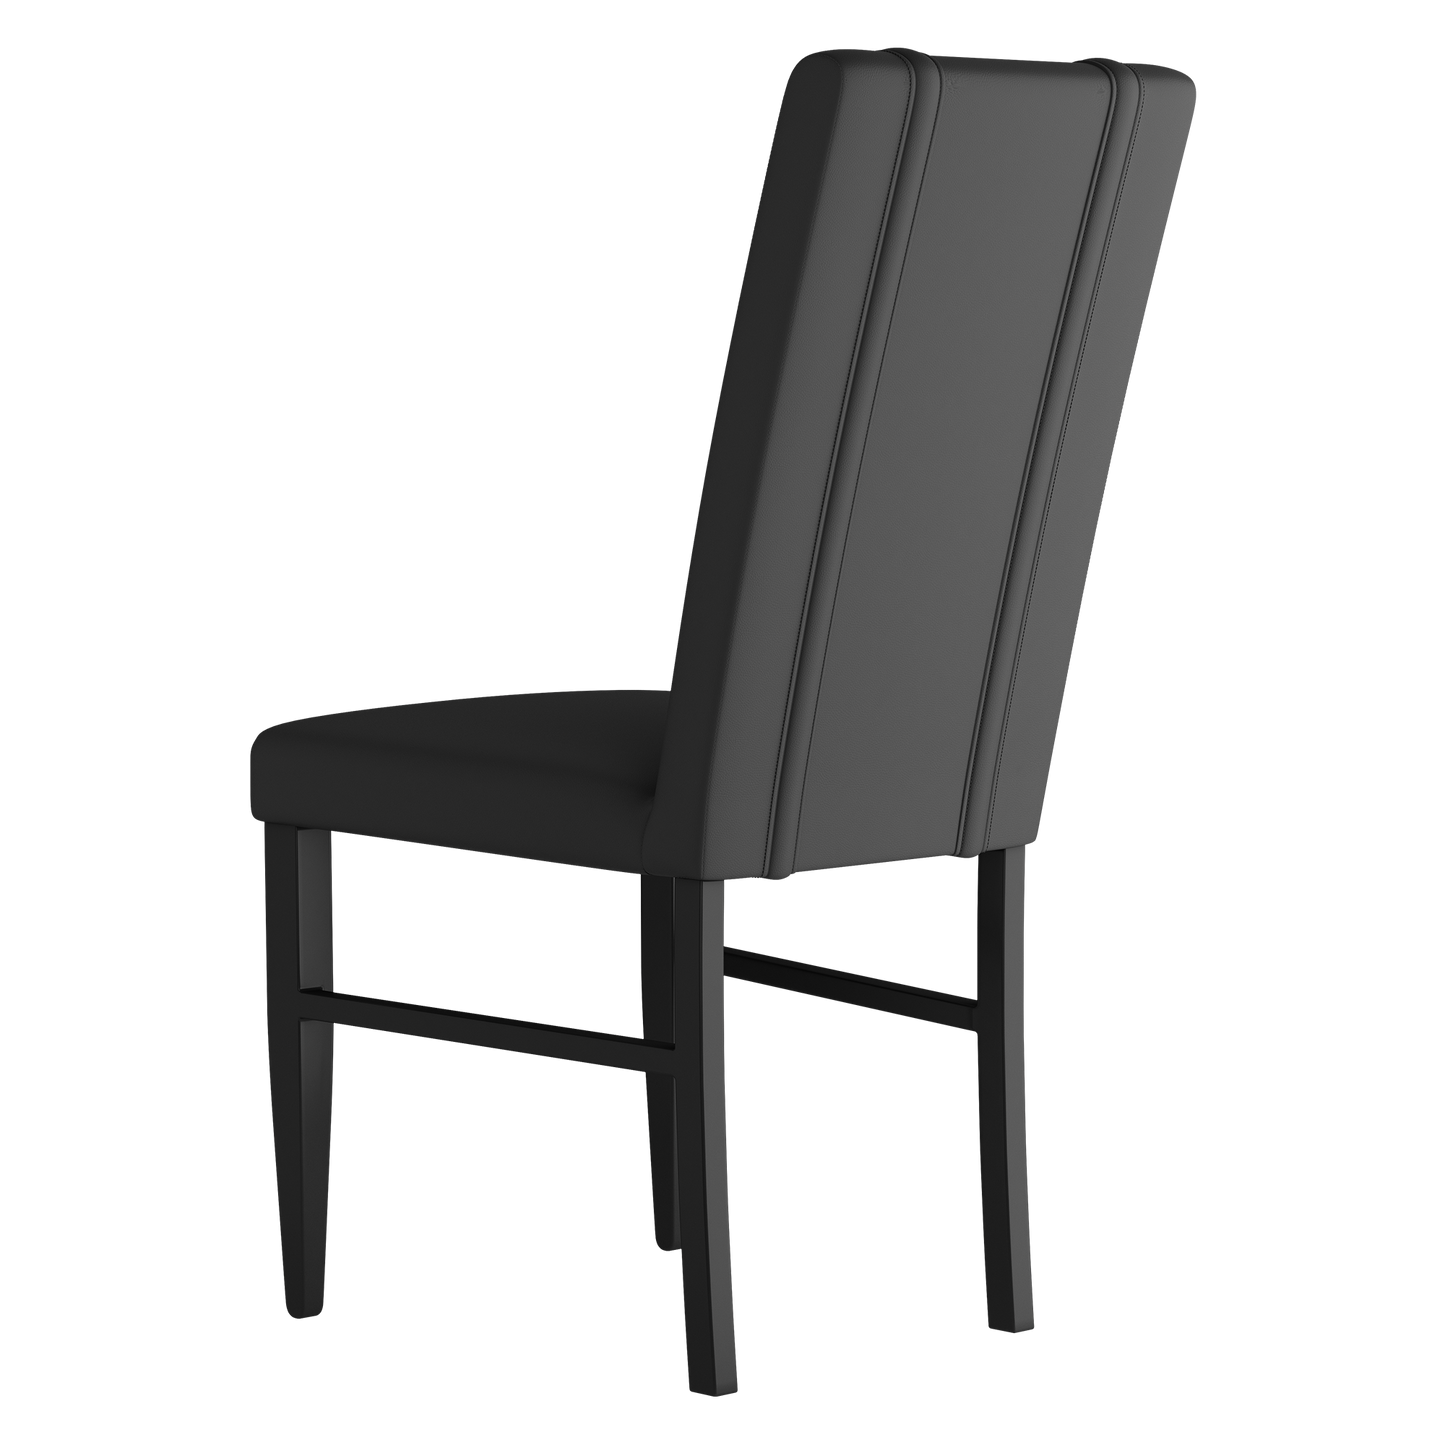 Side Chair 2000 with Bucks Gaming Primary Logo Set of 2 [Can Only Be Shipped to Wisconsin]